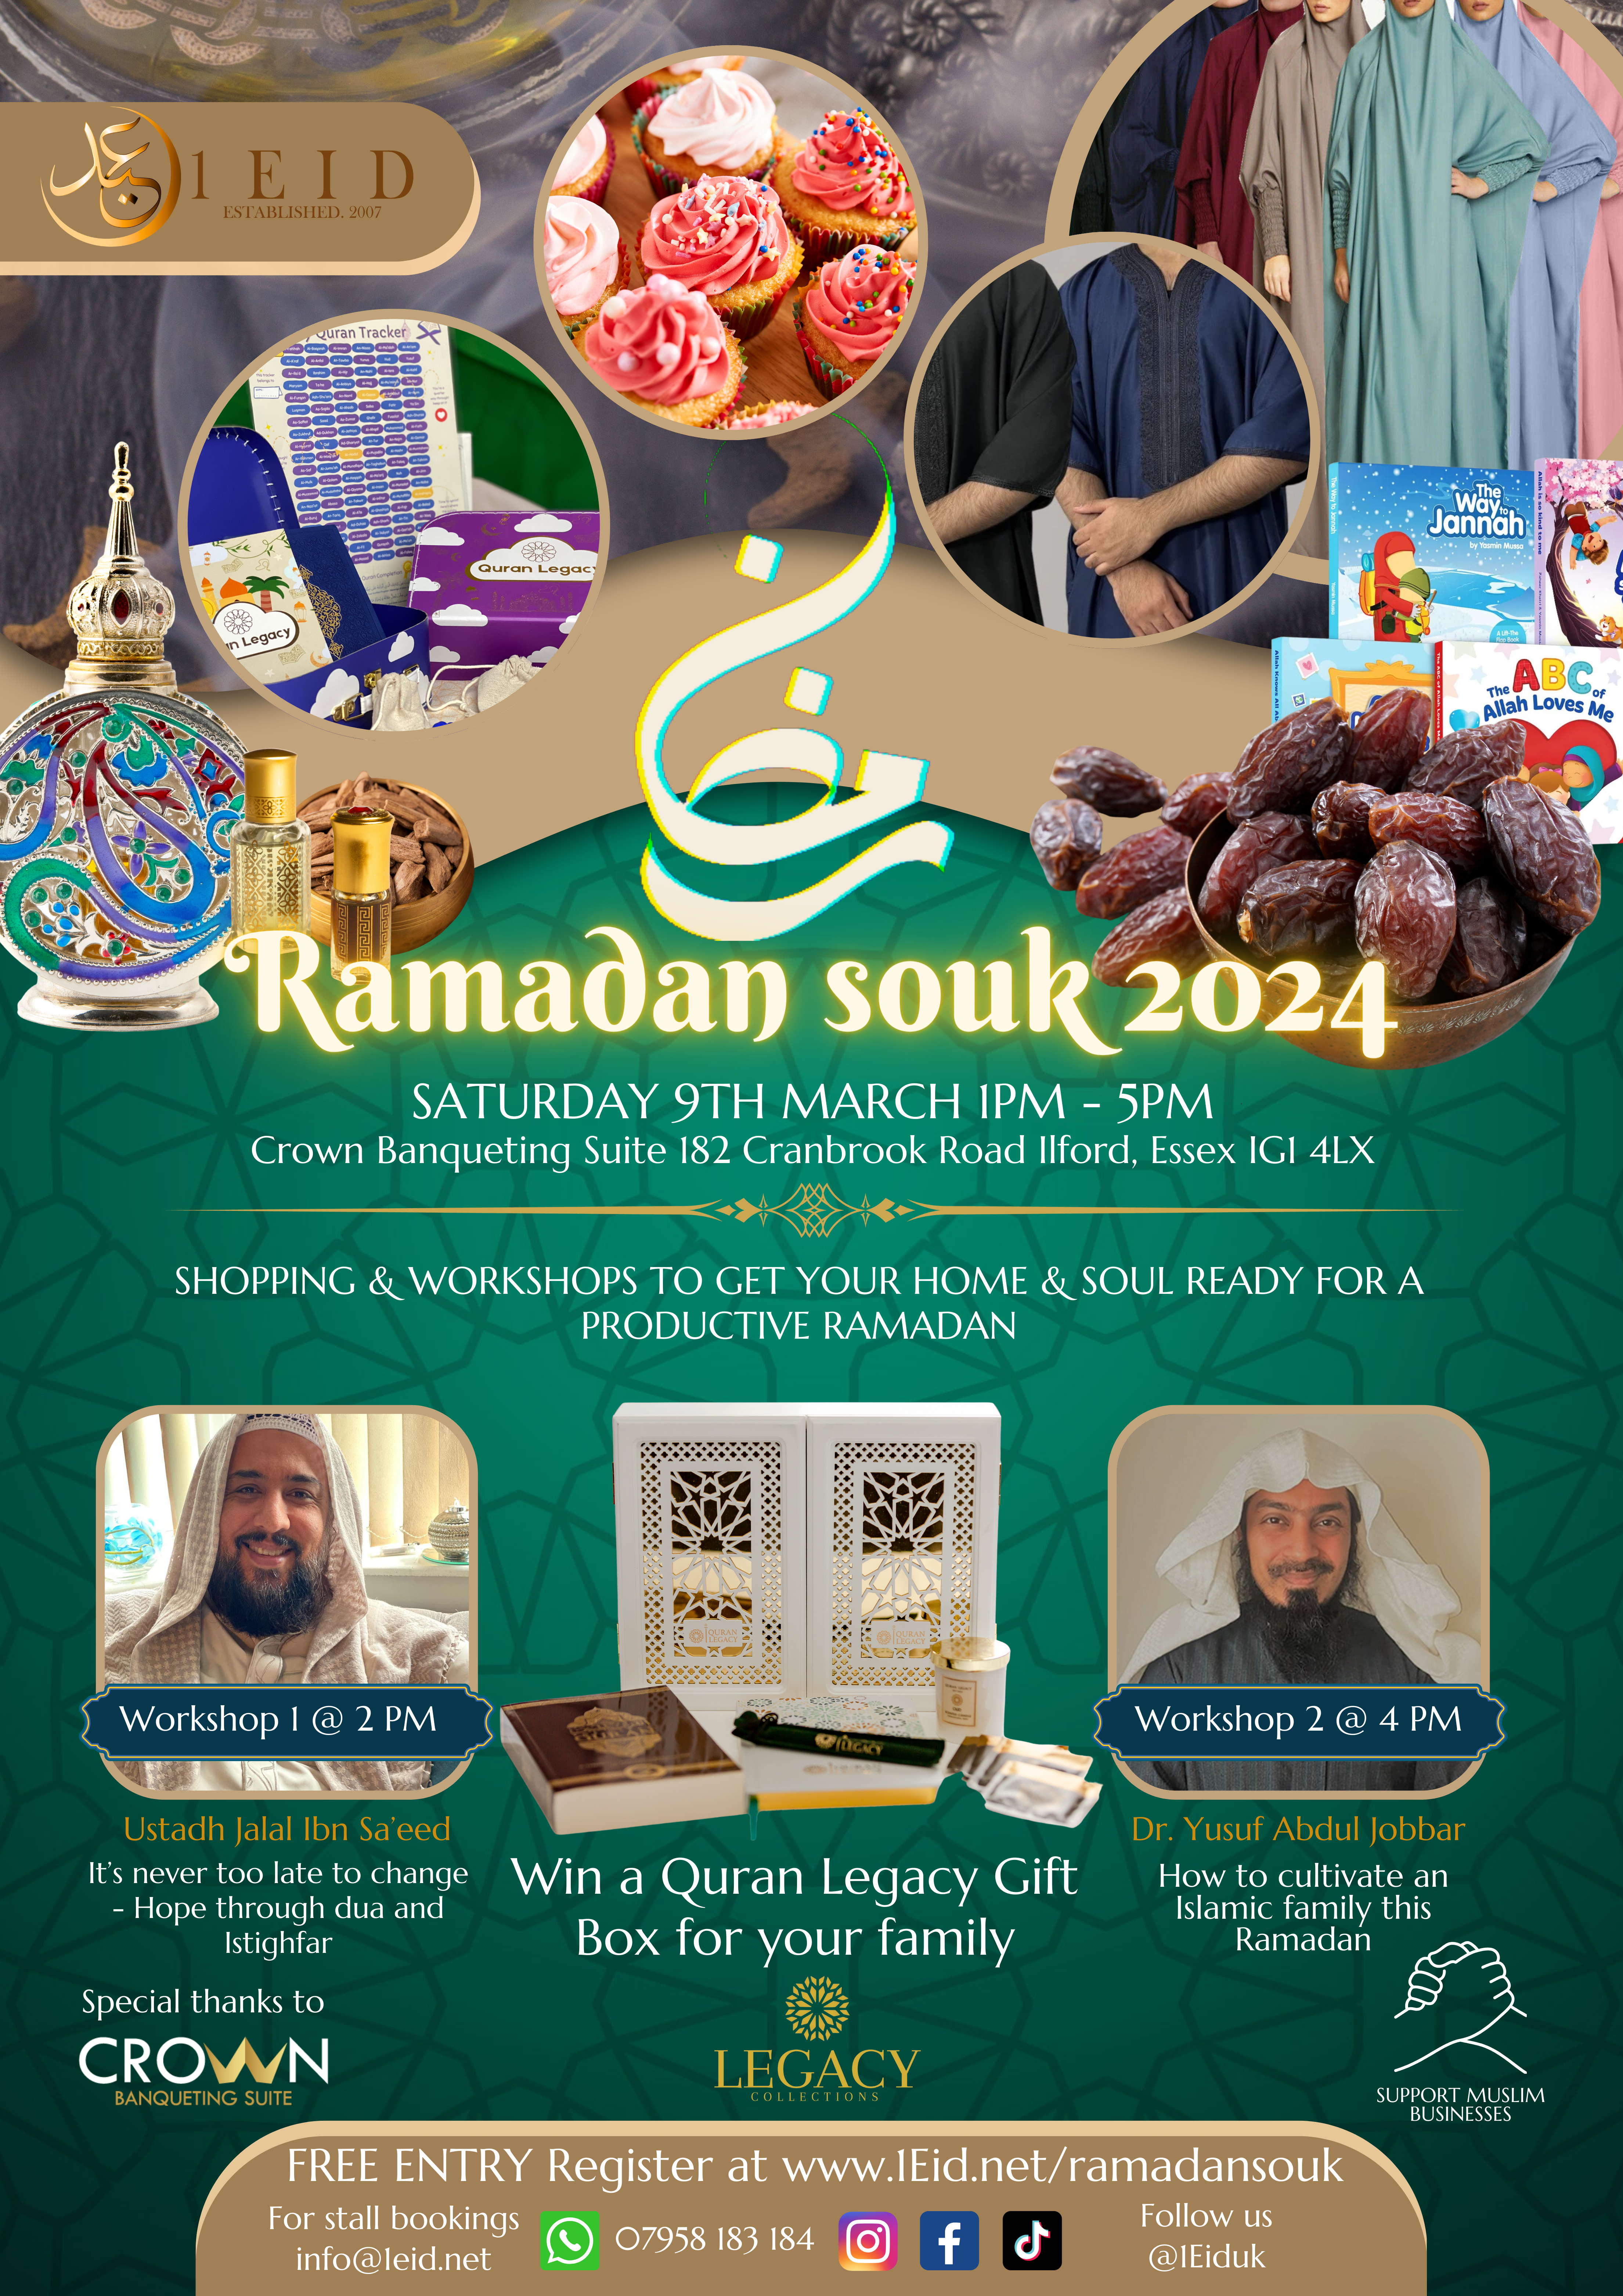 Ramadan event with shopping and workshops